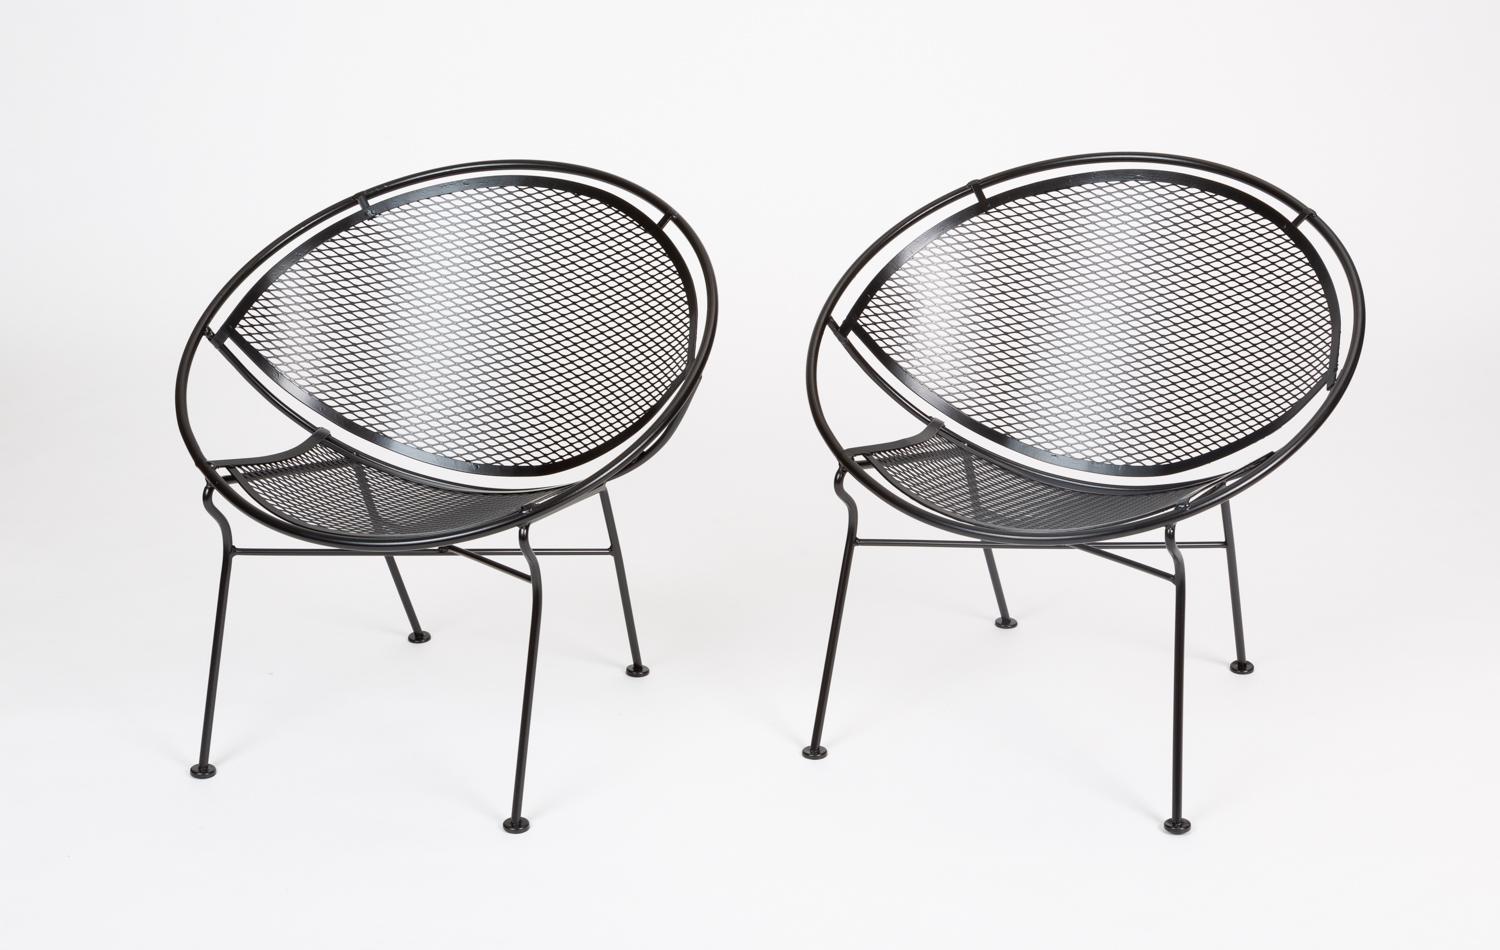 Two “Radar” wrought iron patio lounge chairs designed by Maurizio Tempestini for John Salterini. Each chair has a bisected hoop construction with a delicate grid of wrought iron forming the body. Four angled legs with flat disc feet support the